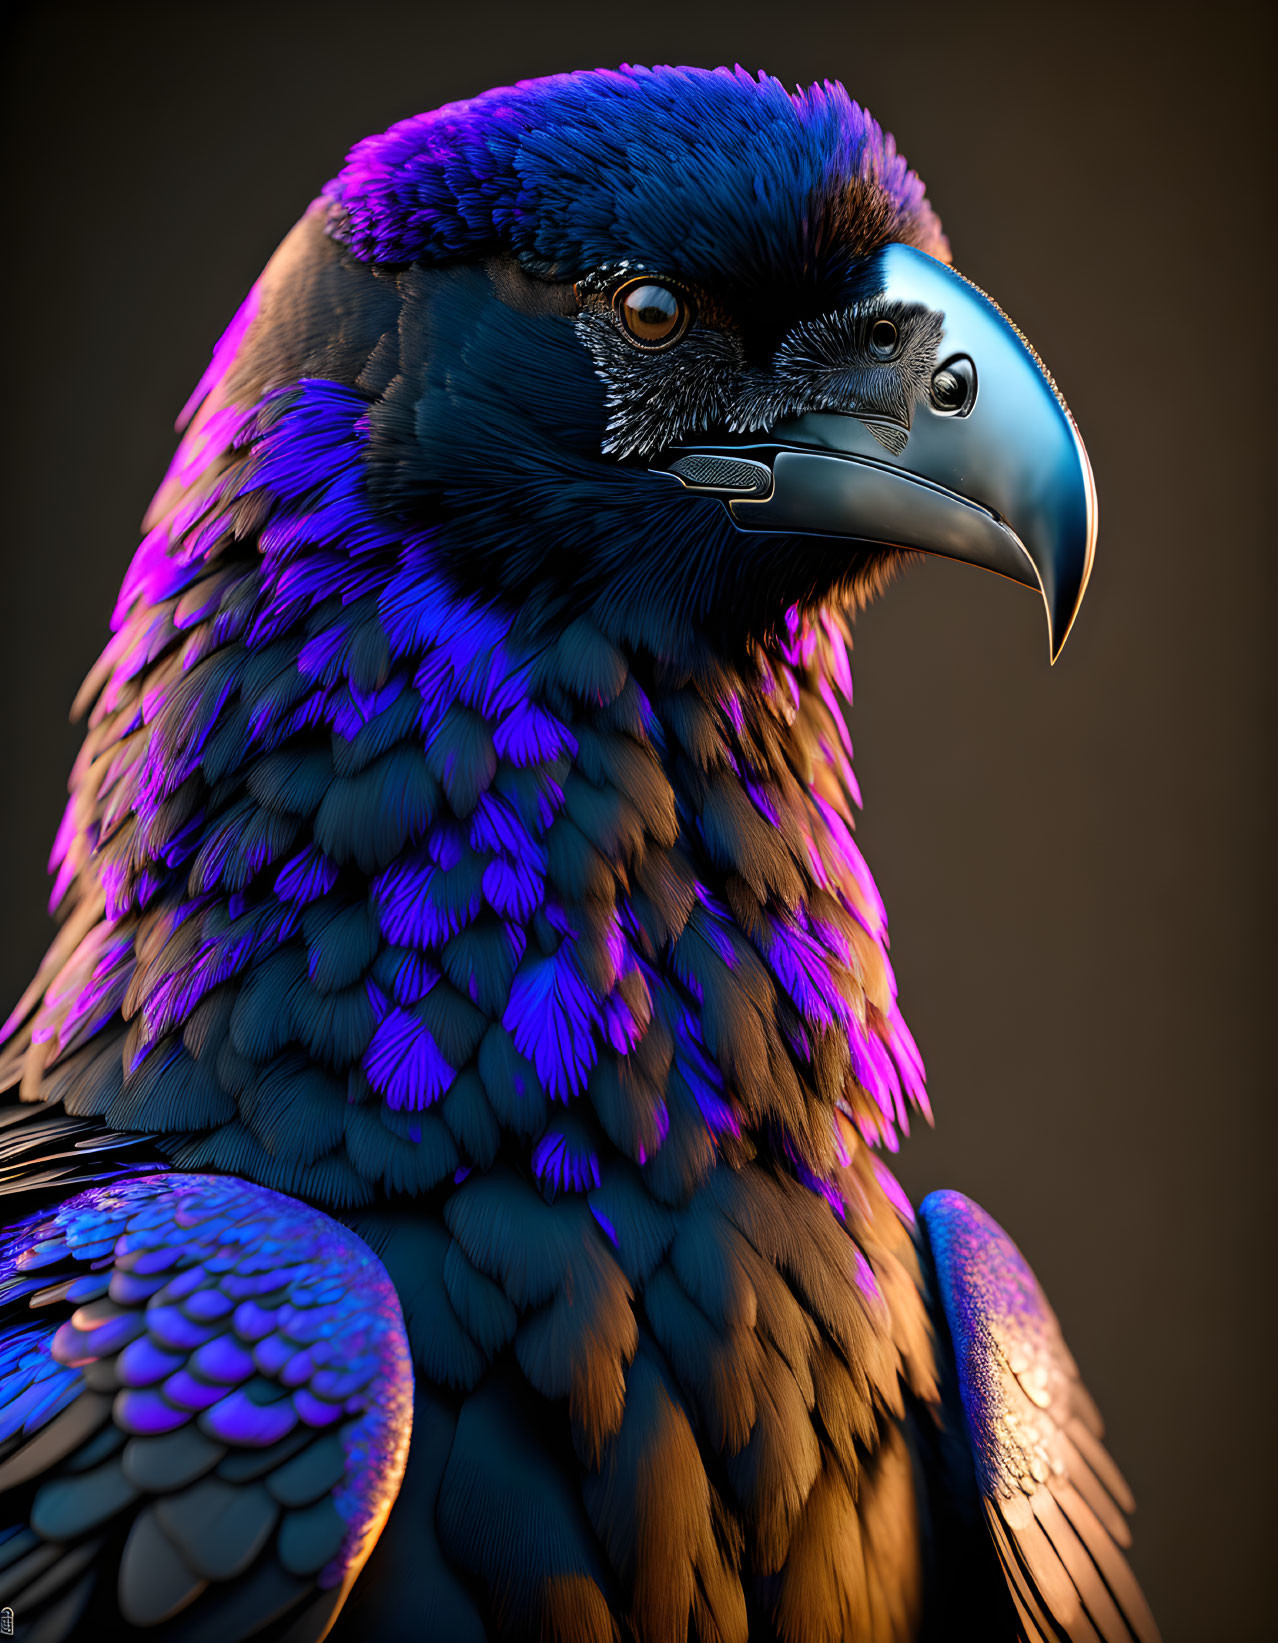 Vivid Digital Artwork: Eagle with Blue and Purple Feathers